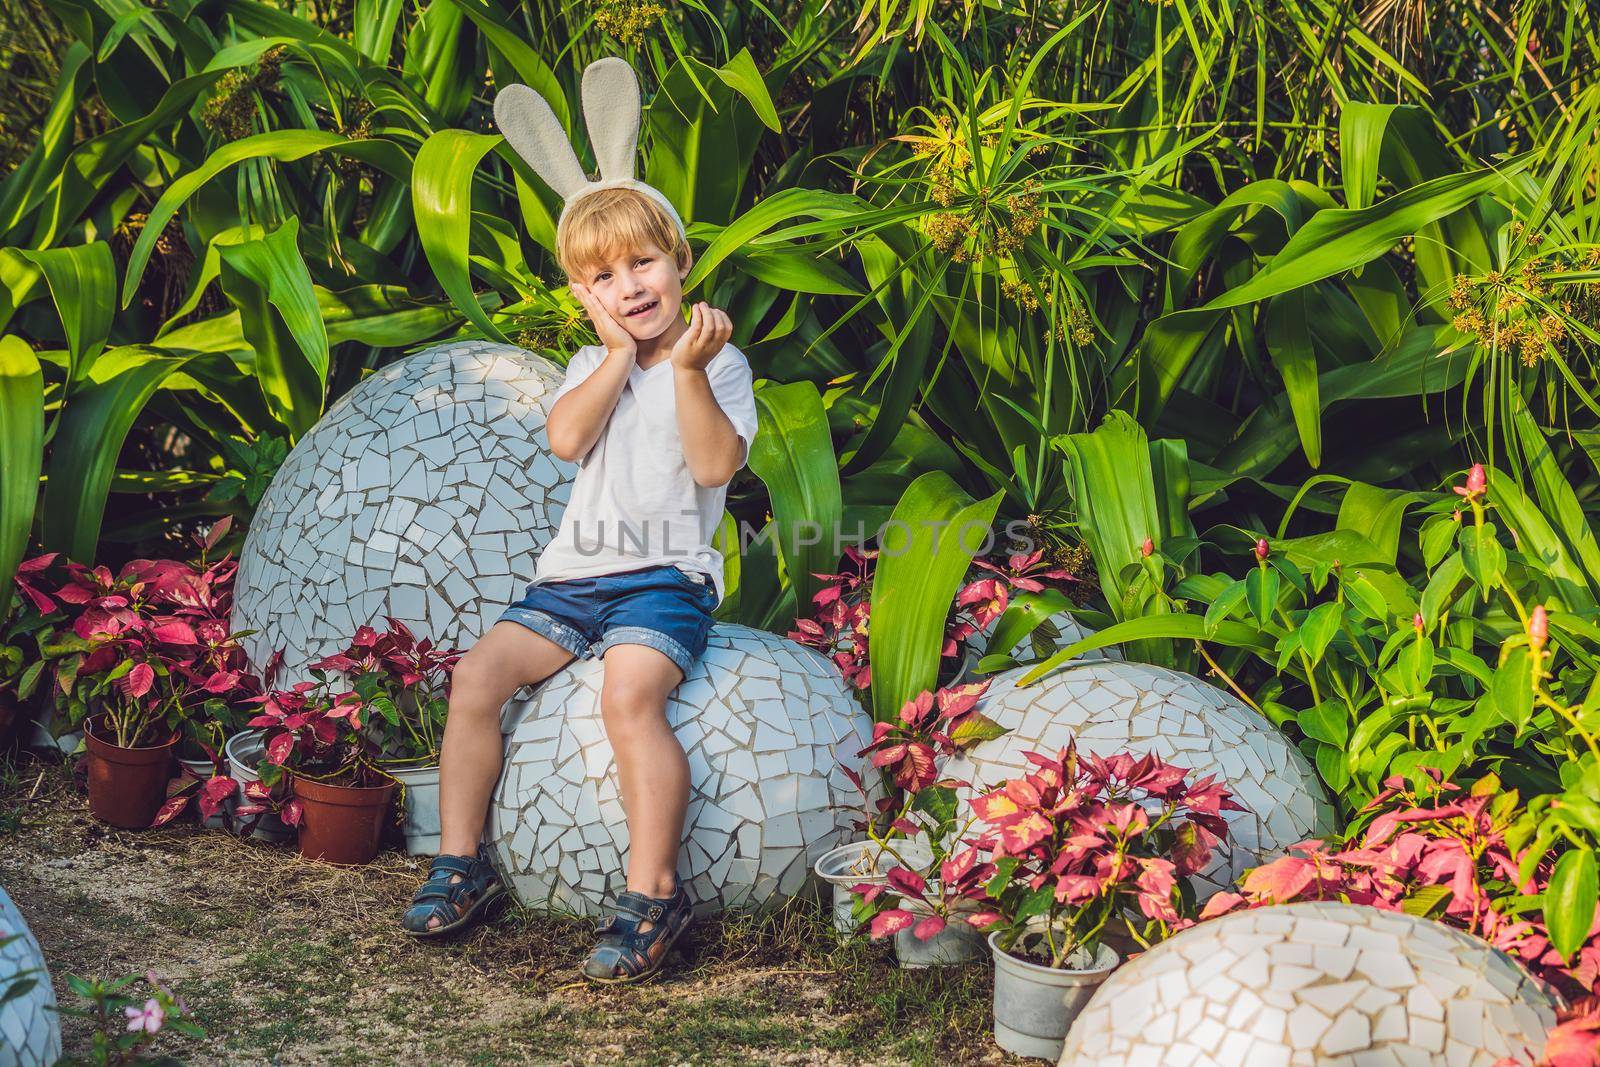 Cute little kid boy with bunny ears having fun with traditional Easter eggs hunt, outdoors. Celebrating Easter holiday. Toddler finding, colorful eggs by galitskaya